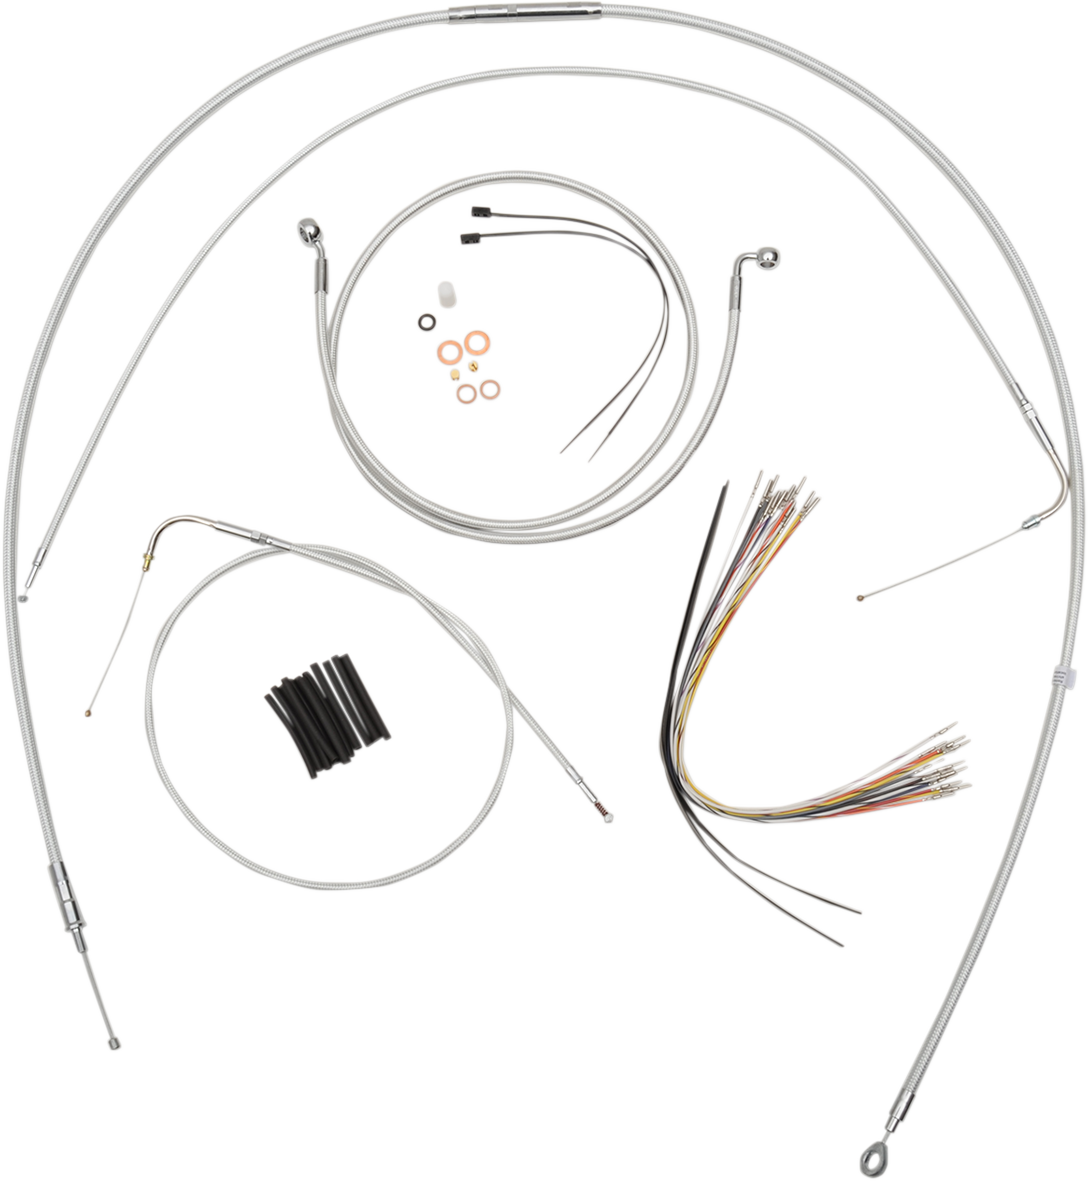 0662-0121 - MAGNUM Control Cable Kit - Sterling Chromite II? 387801